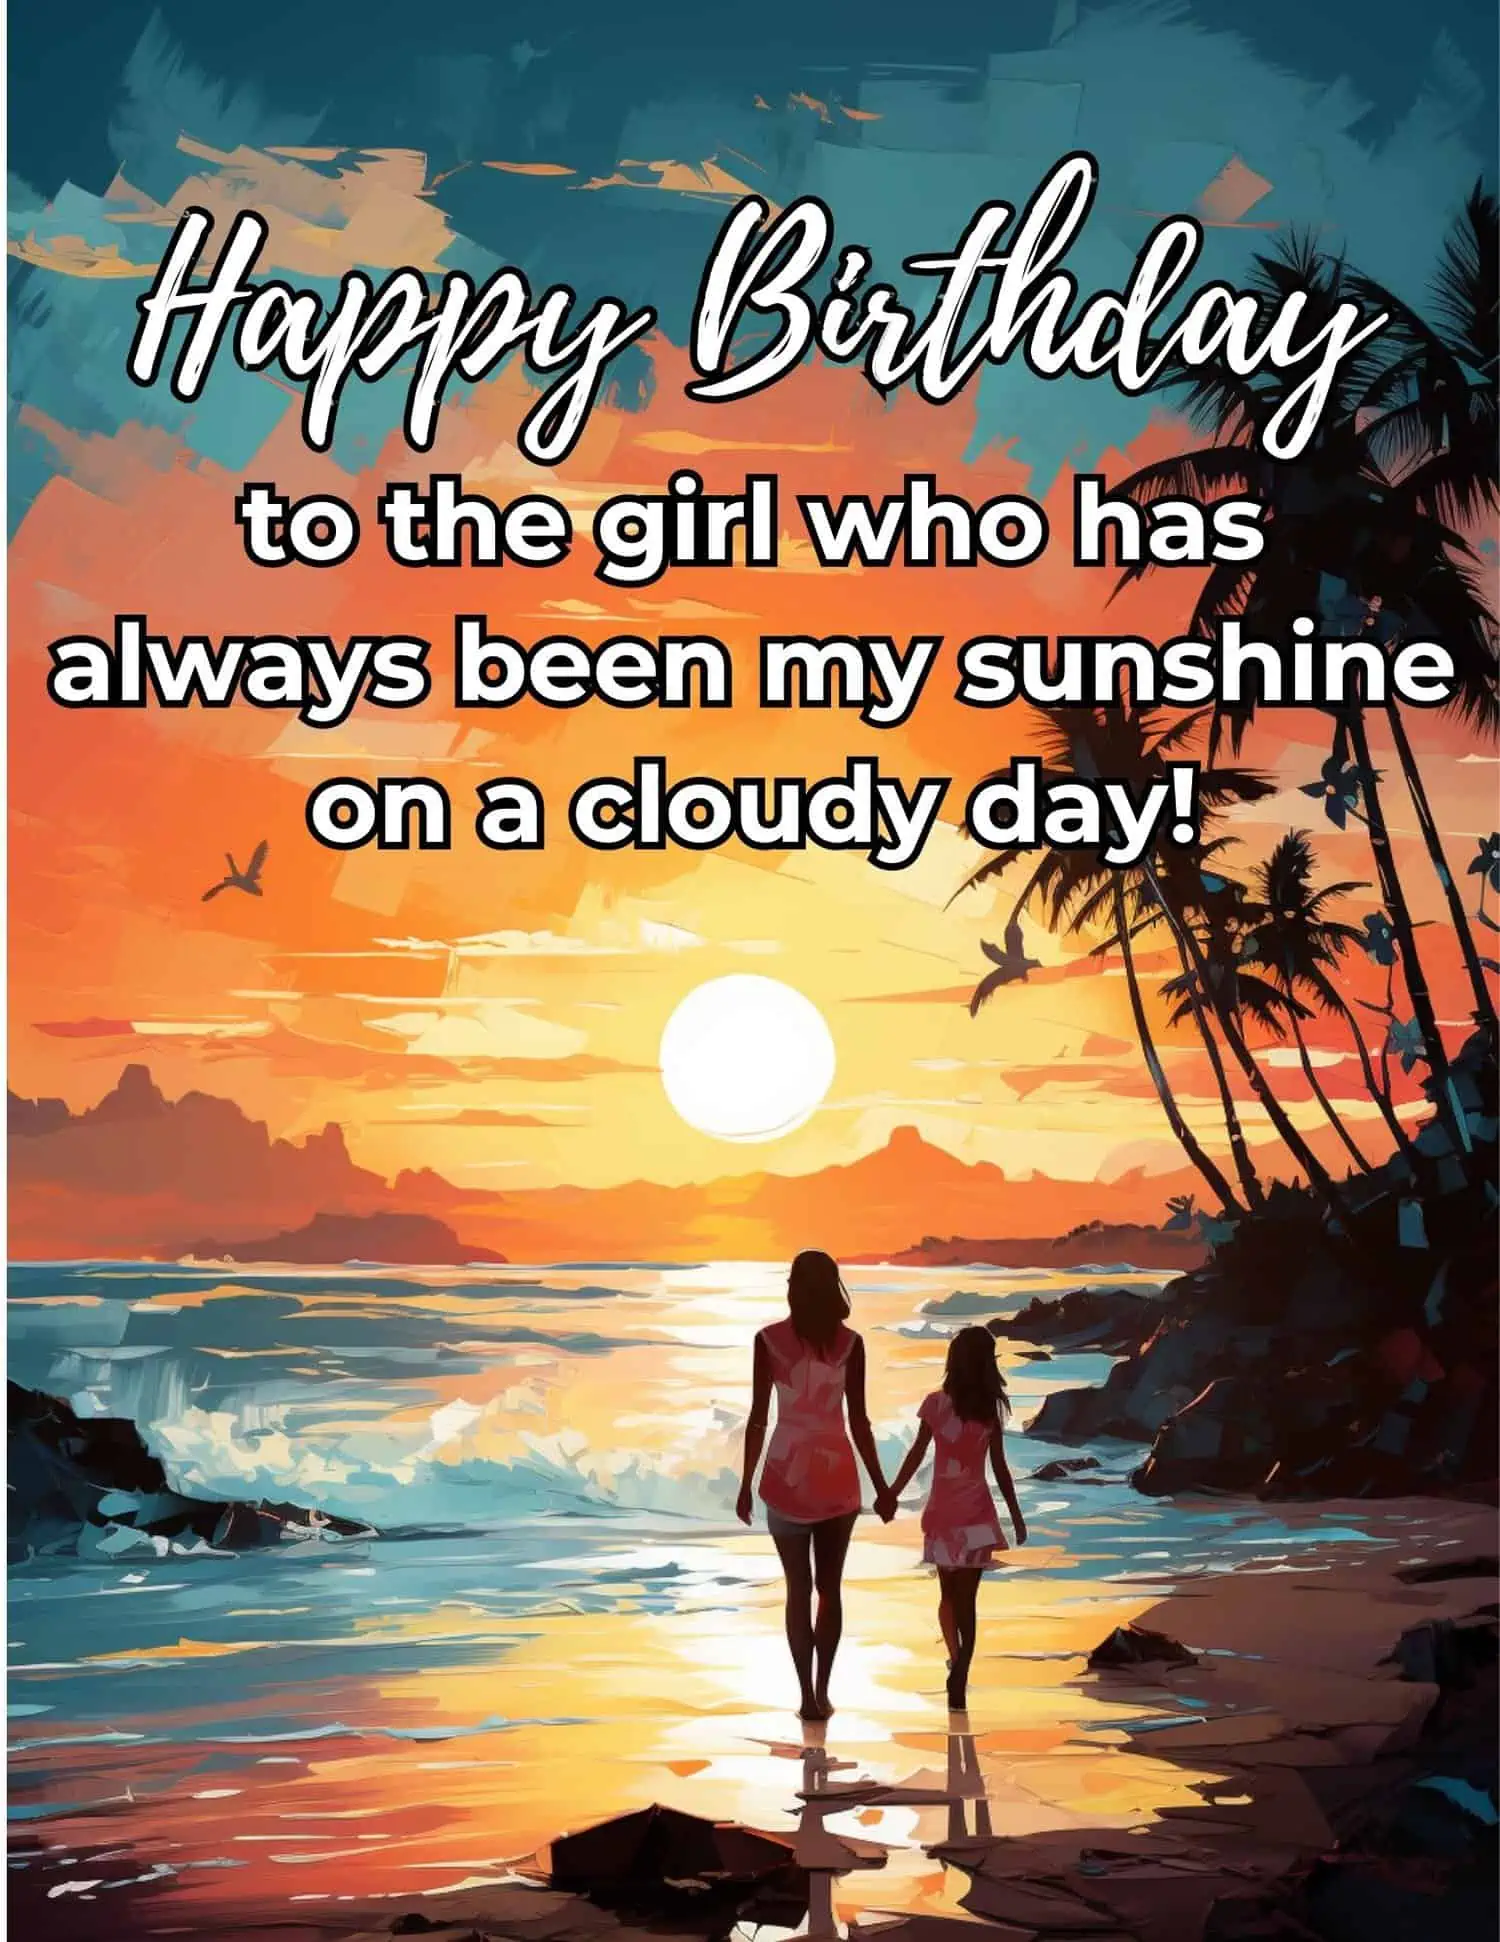 Beautiful wishes for a daughter on her special day.